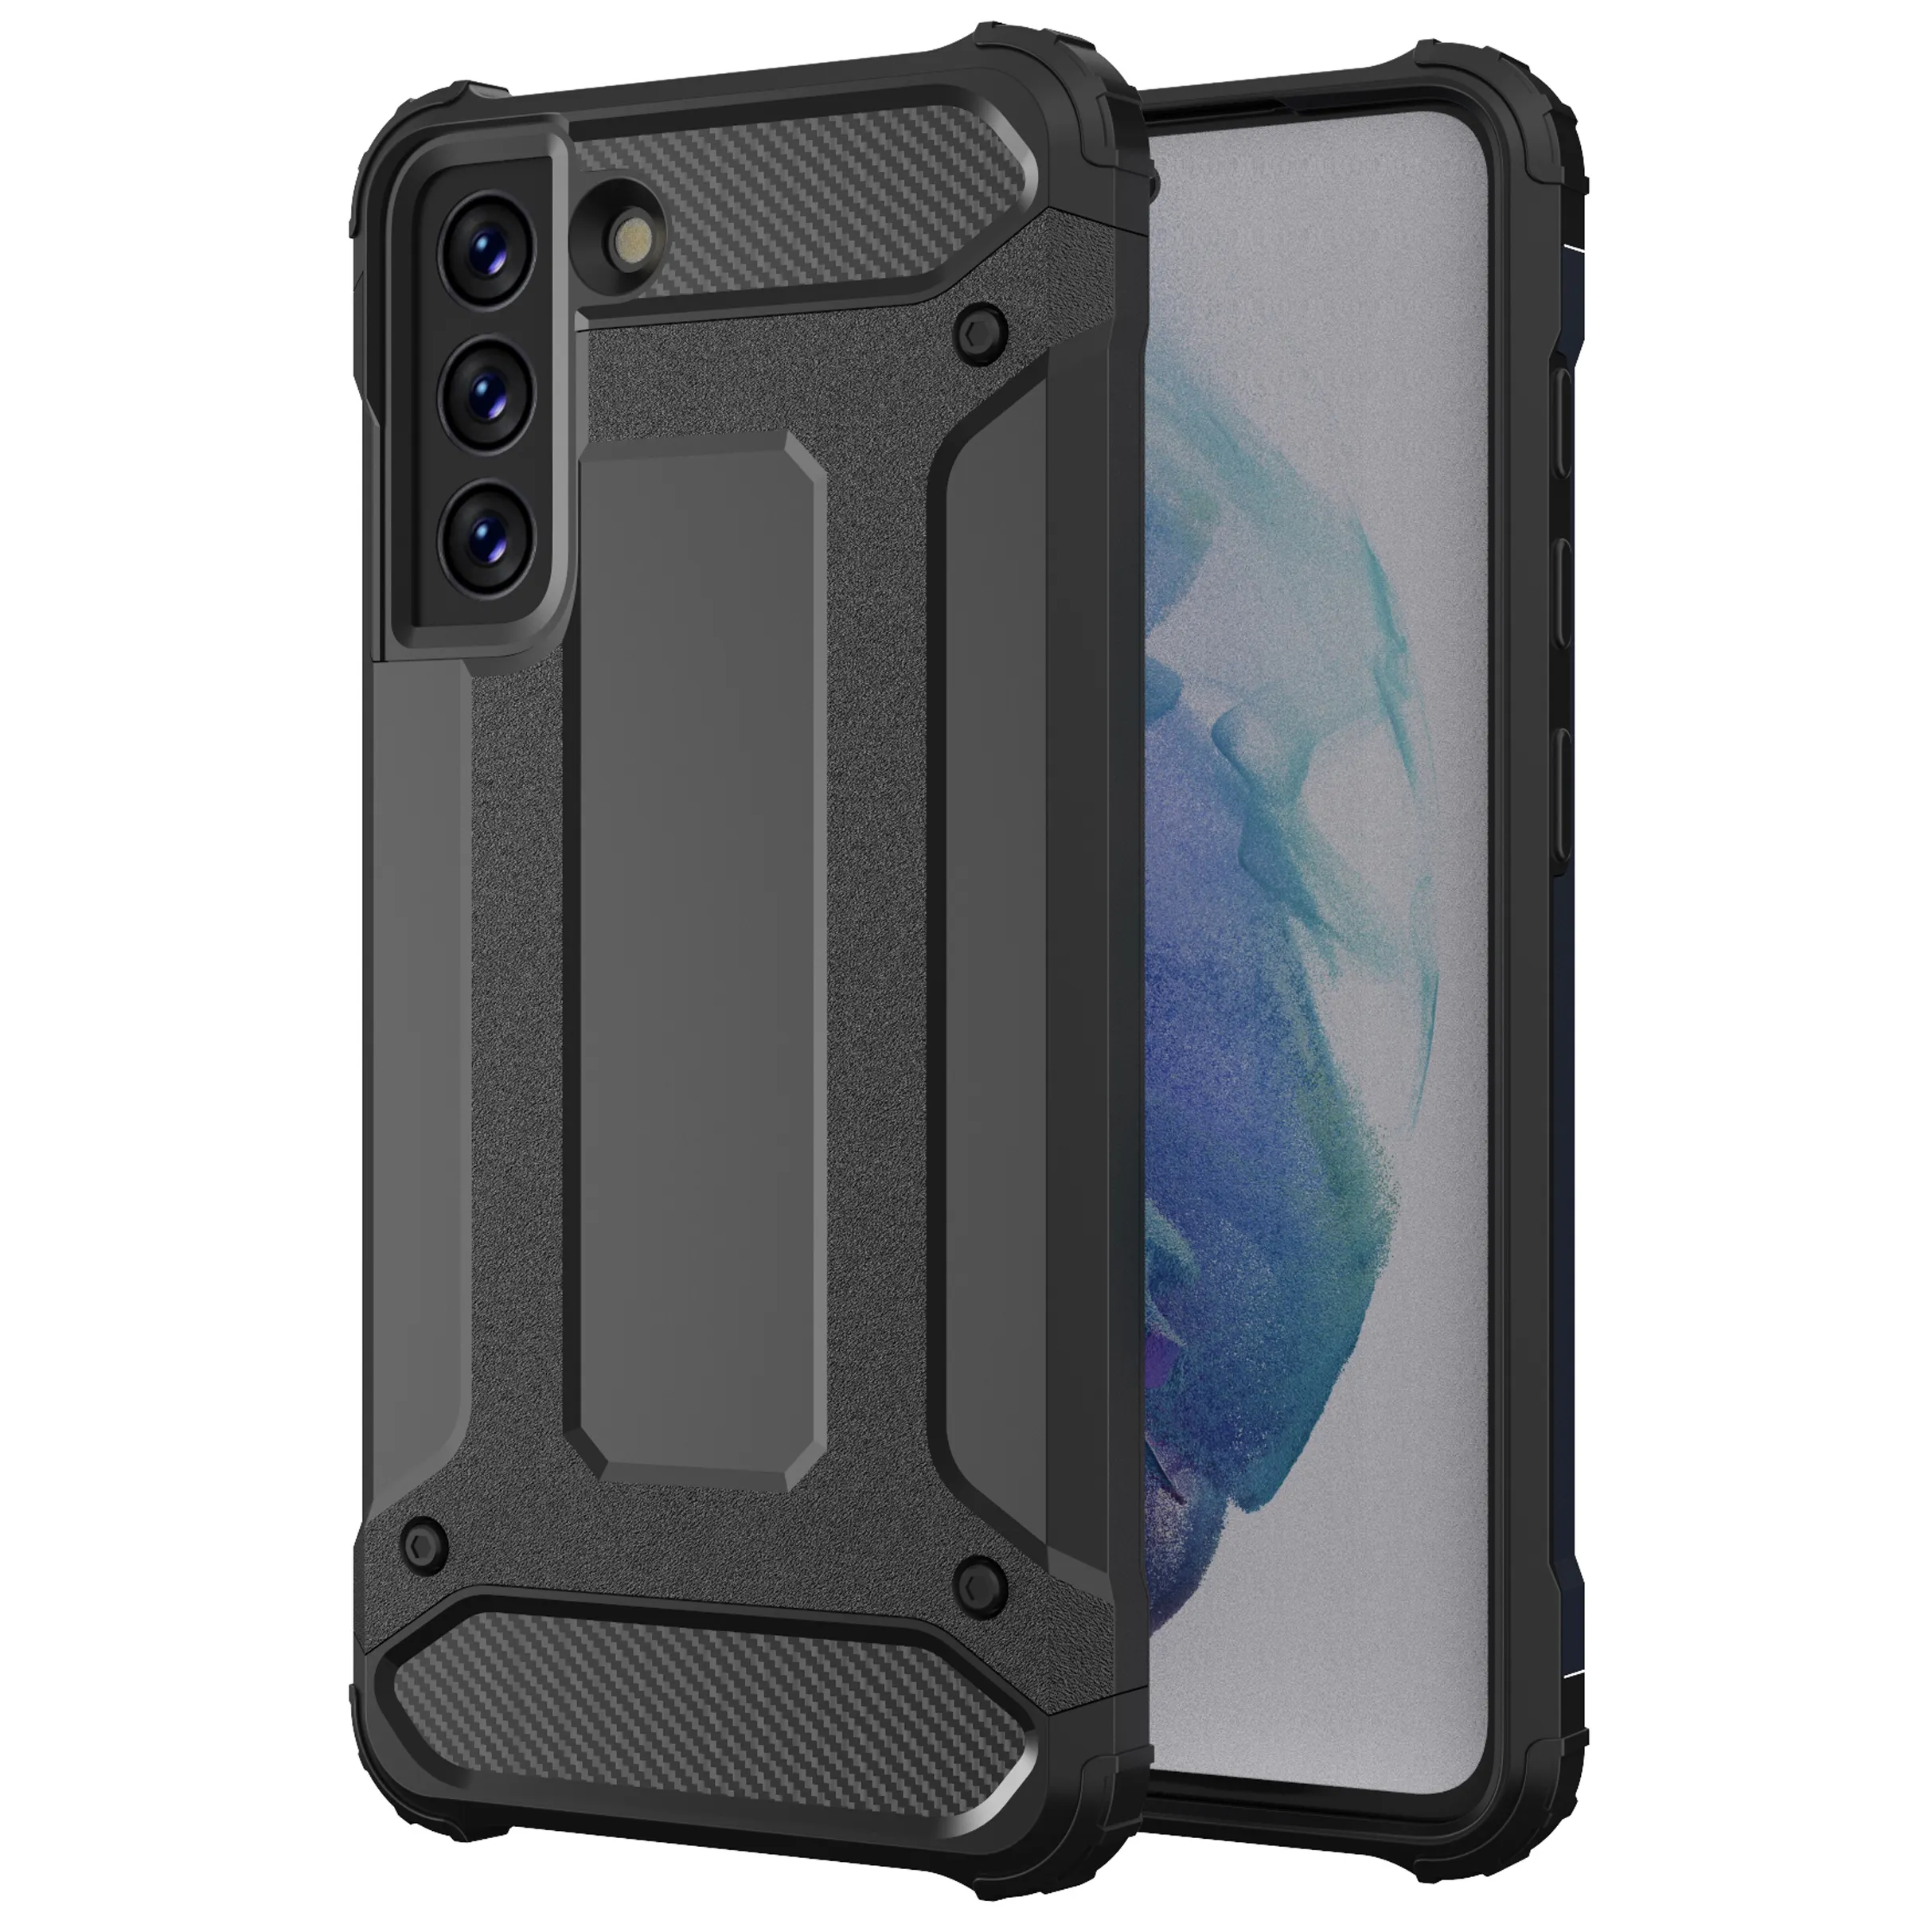 Wholesale Phpne Case Samsumg S10 Armor Shockproof Case De For Samsung Galaxy S10 Plus 5G S9Puls S21fe Phone Cases